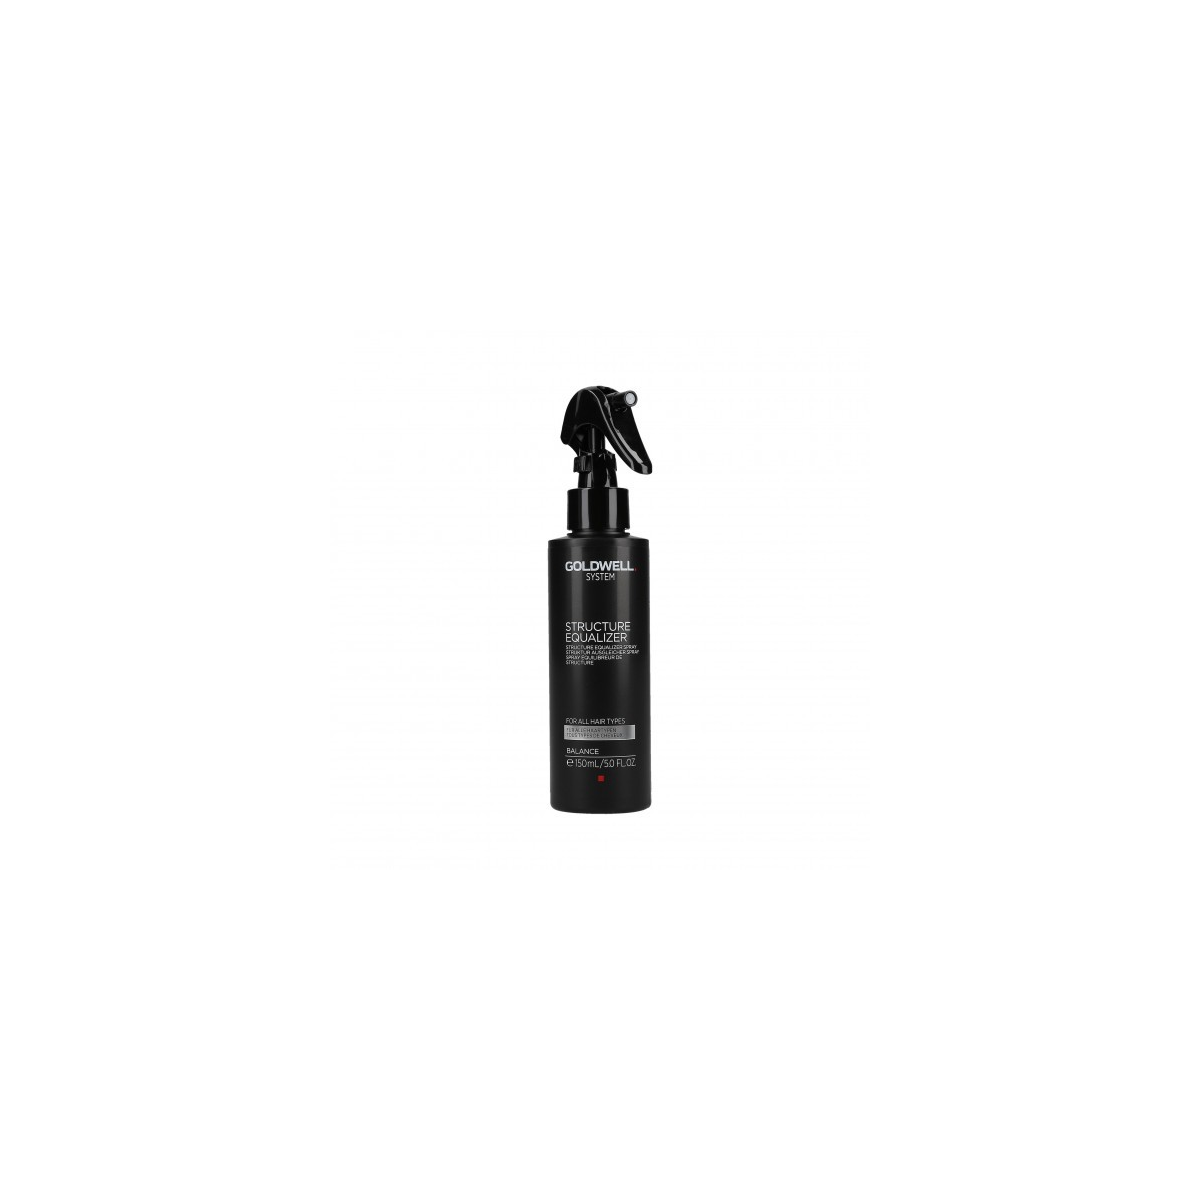 https://www.pianetacapelli.it/8852-product_zoom/goldwell-system-structure-equalizer-150ml-spray-equalizzante.jpg